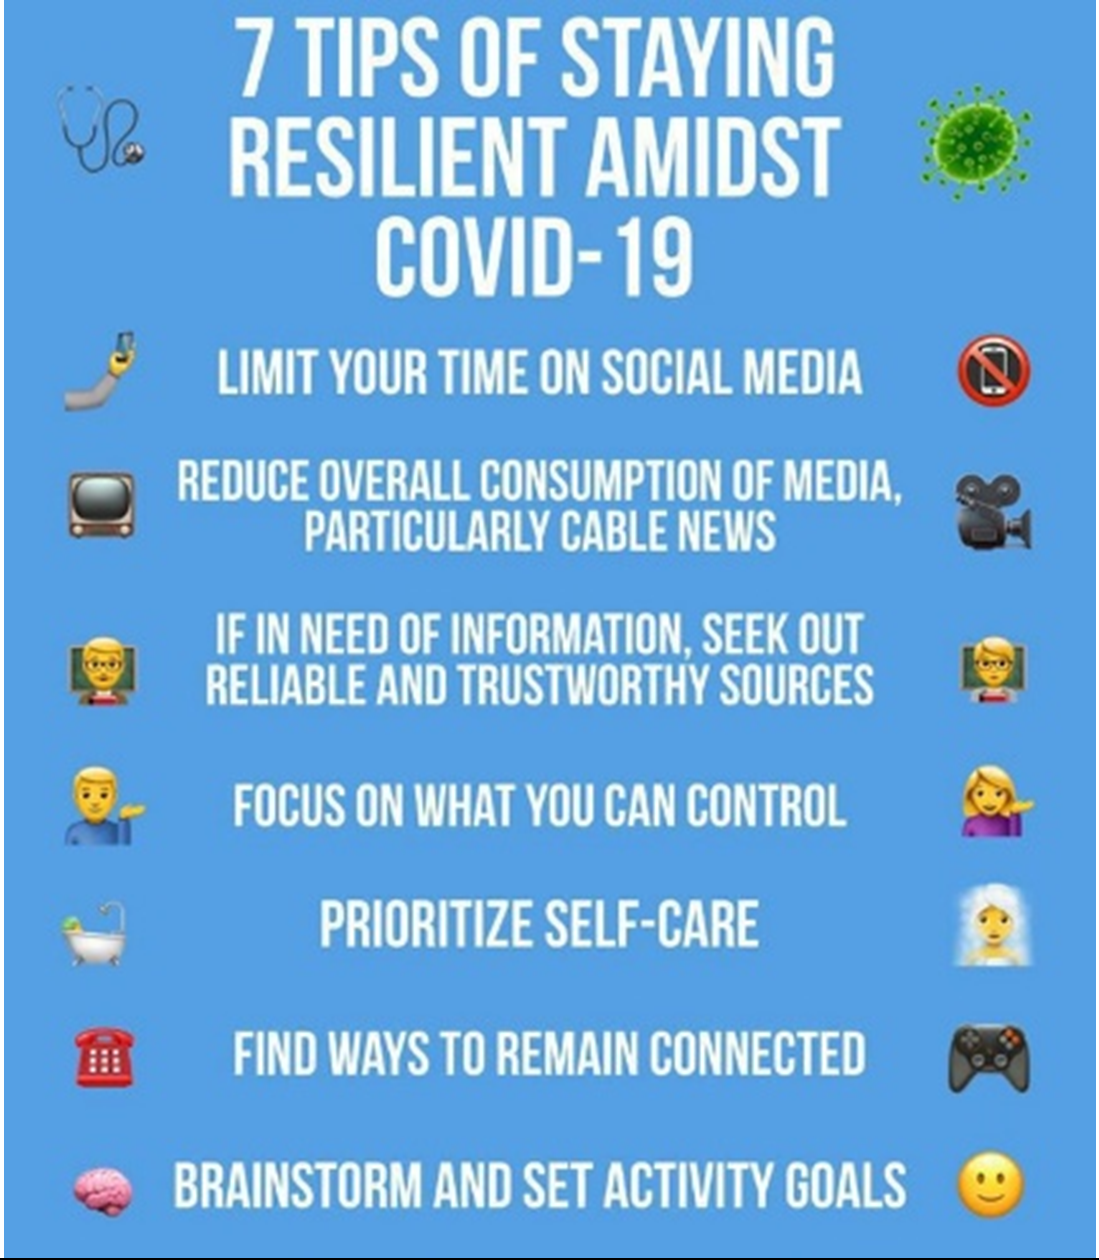 Blue graphic with emojis along either side. White text reads: "7 Tips of Staying Resilient Amidst COVID-19 Limit your time on social media Reduce overall consumption of media, particularly cable news If in need of information, seek out reliable and trustworthy sources Focus on what you can control Prioritize self-care Find ways to remain connected Brainstorm and set activity goals"